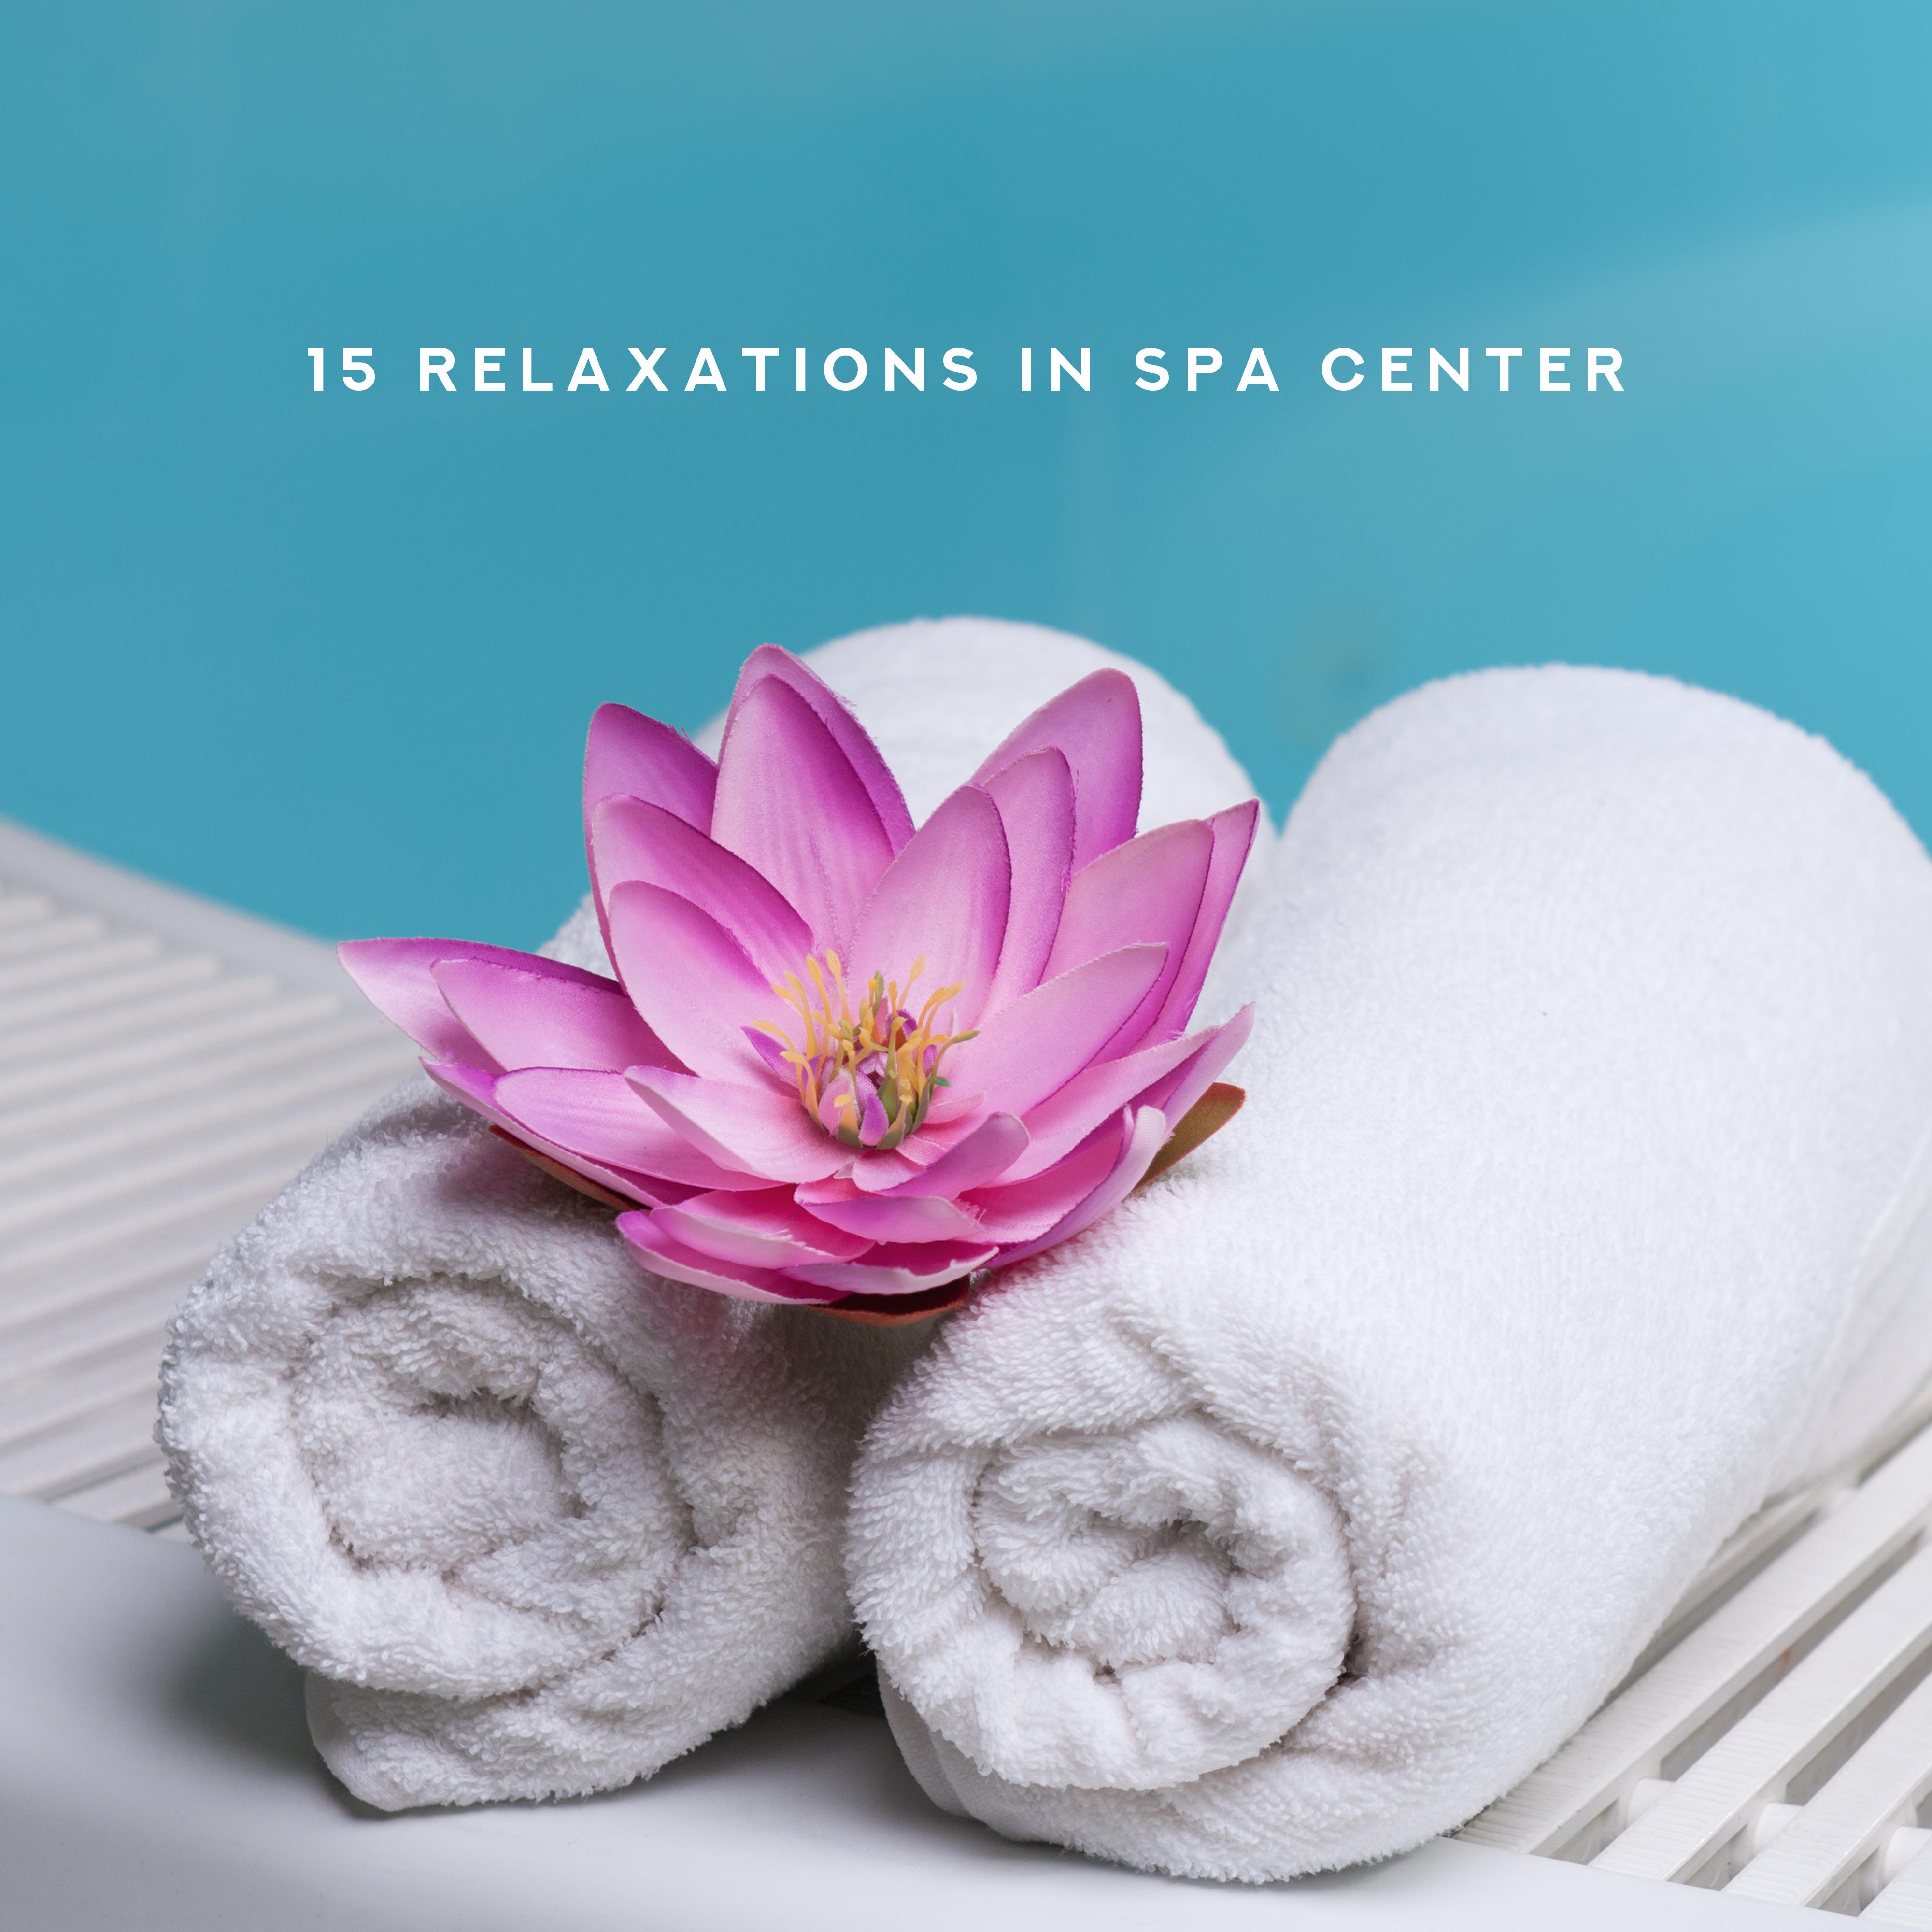 15 Relaxations in Spa Center: 2019 New Age Nature & Ambient Music for Spa Salon, Wellness Center, Massage Therapy, Sauna Session, Aromatherapy